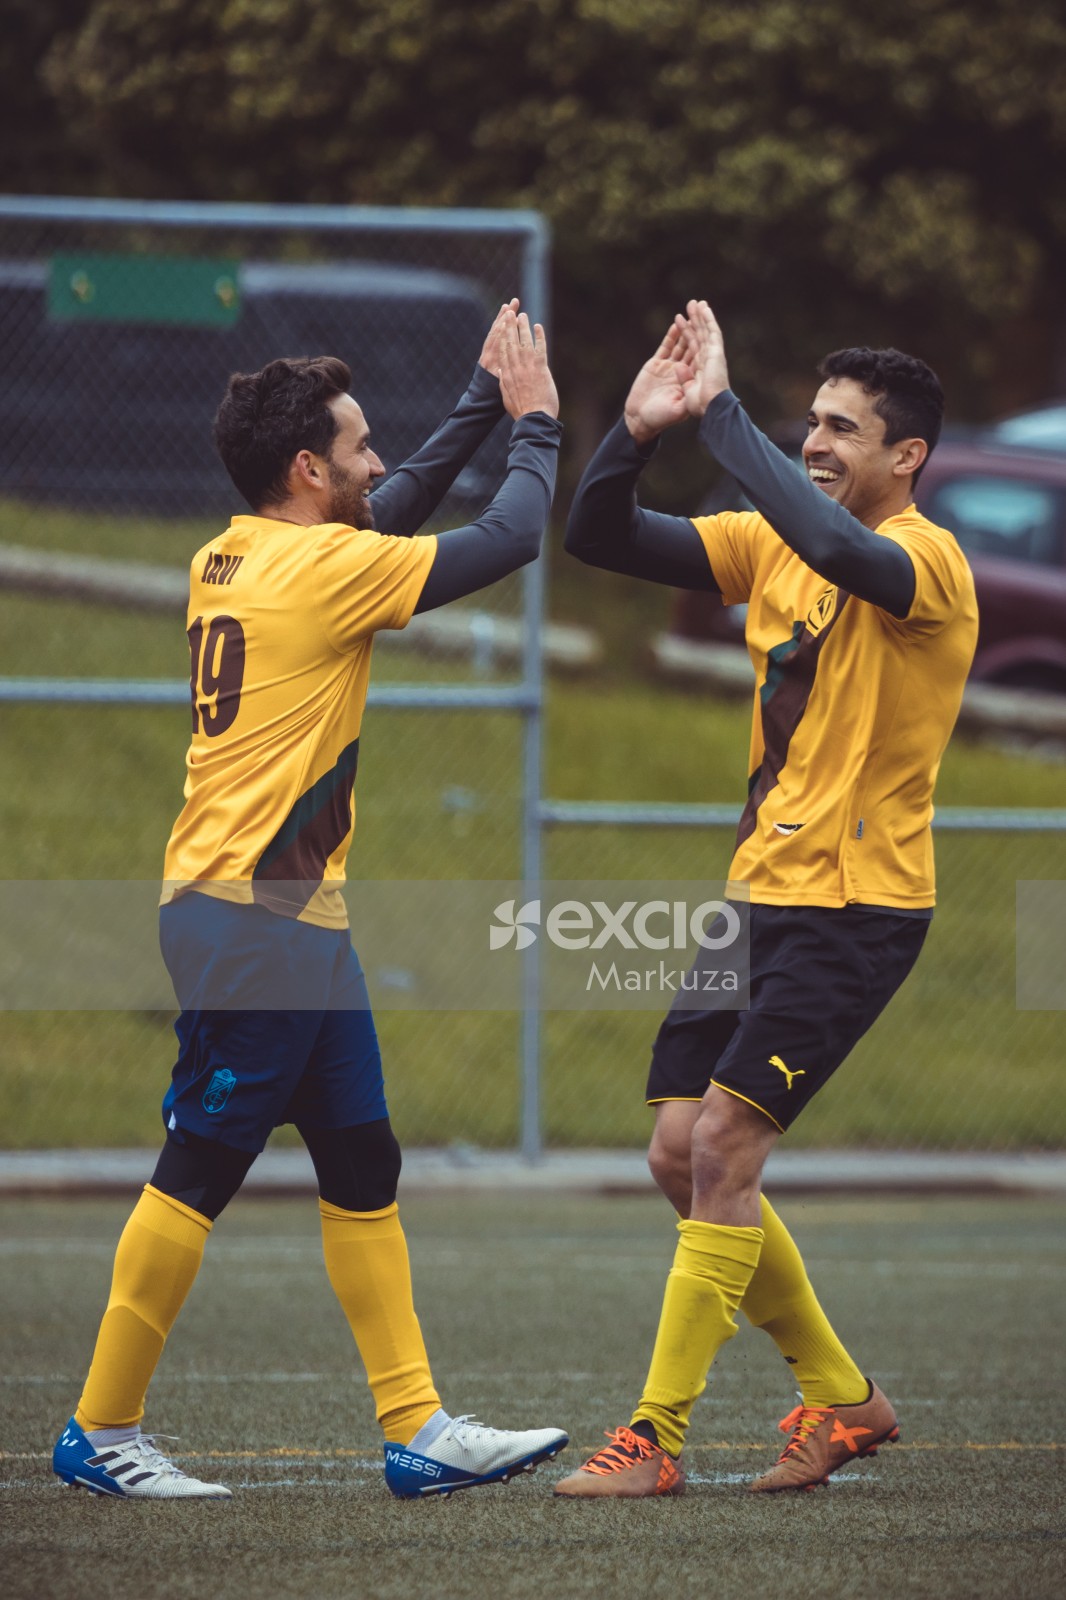 Teammates in yellow shirts double high fiving - Sports Zone sunday league